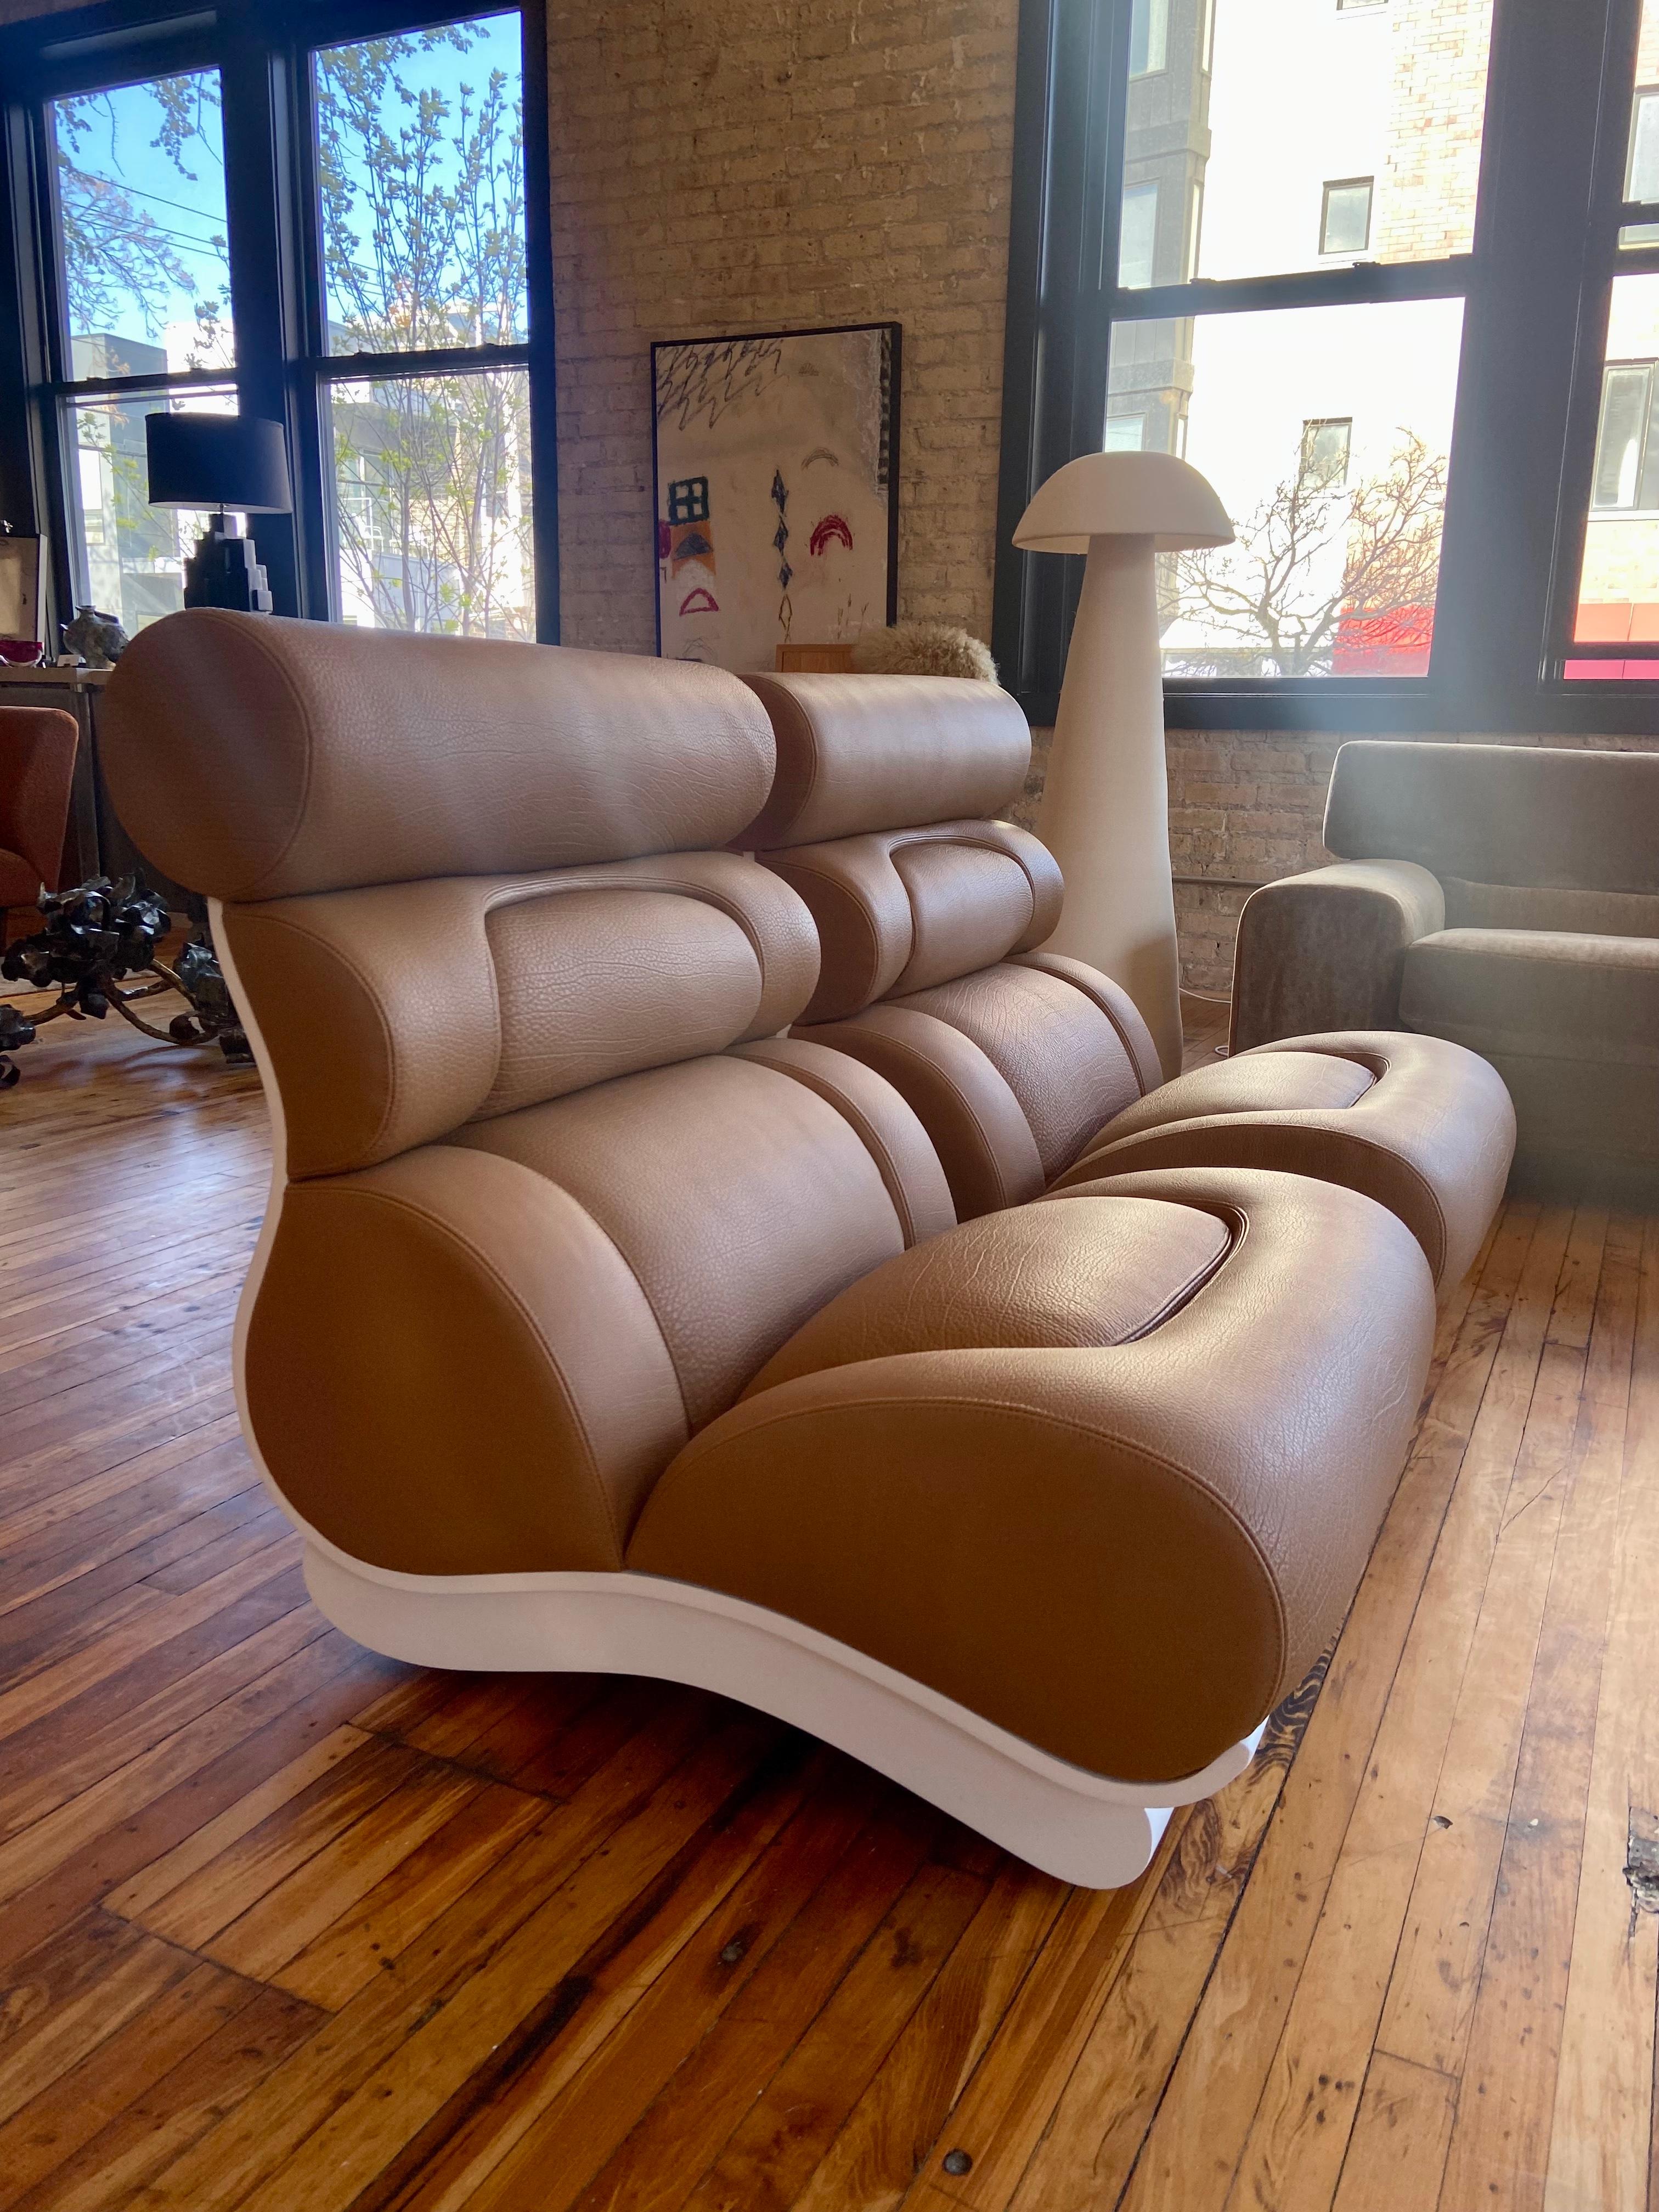 Incredibly cool lounge chairs designed by Raphael Raffel, circa 1960s. The rolled ergonomic back and seat supports create an unmistakable profile reminiscent of automobile designs. Perhaps surprisingly the backs and bases are formed from bent wood;